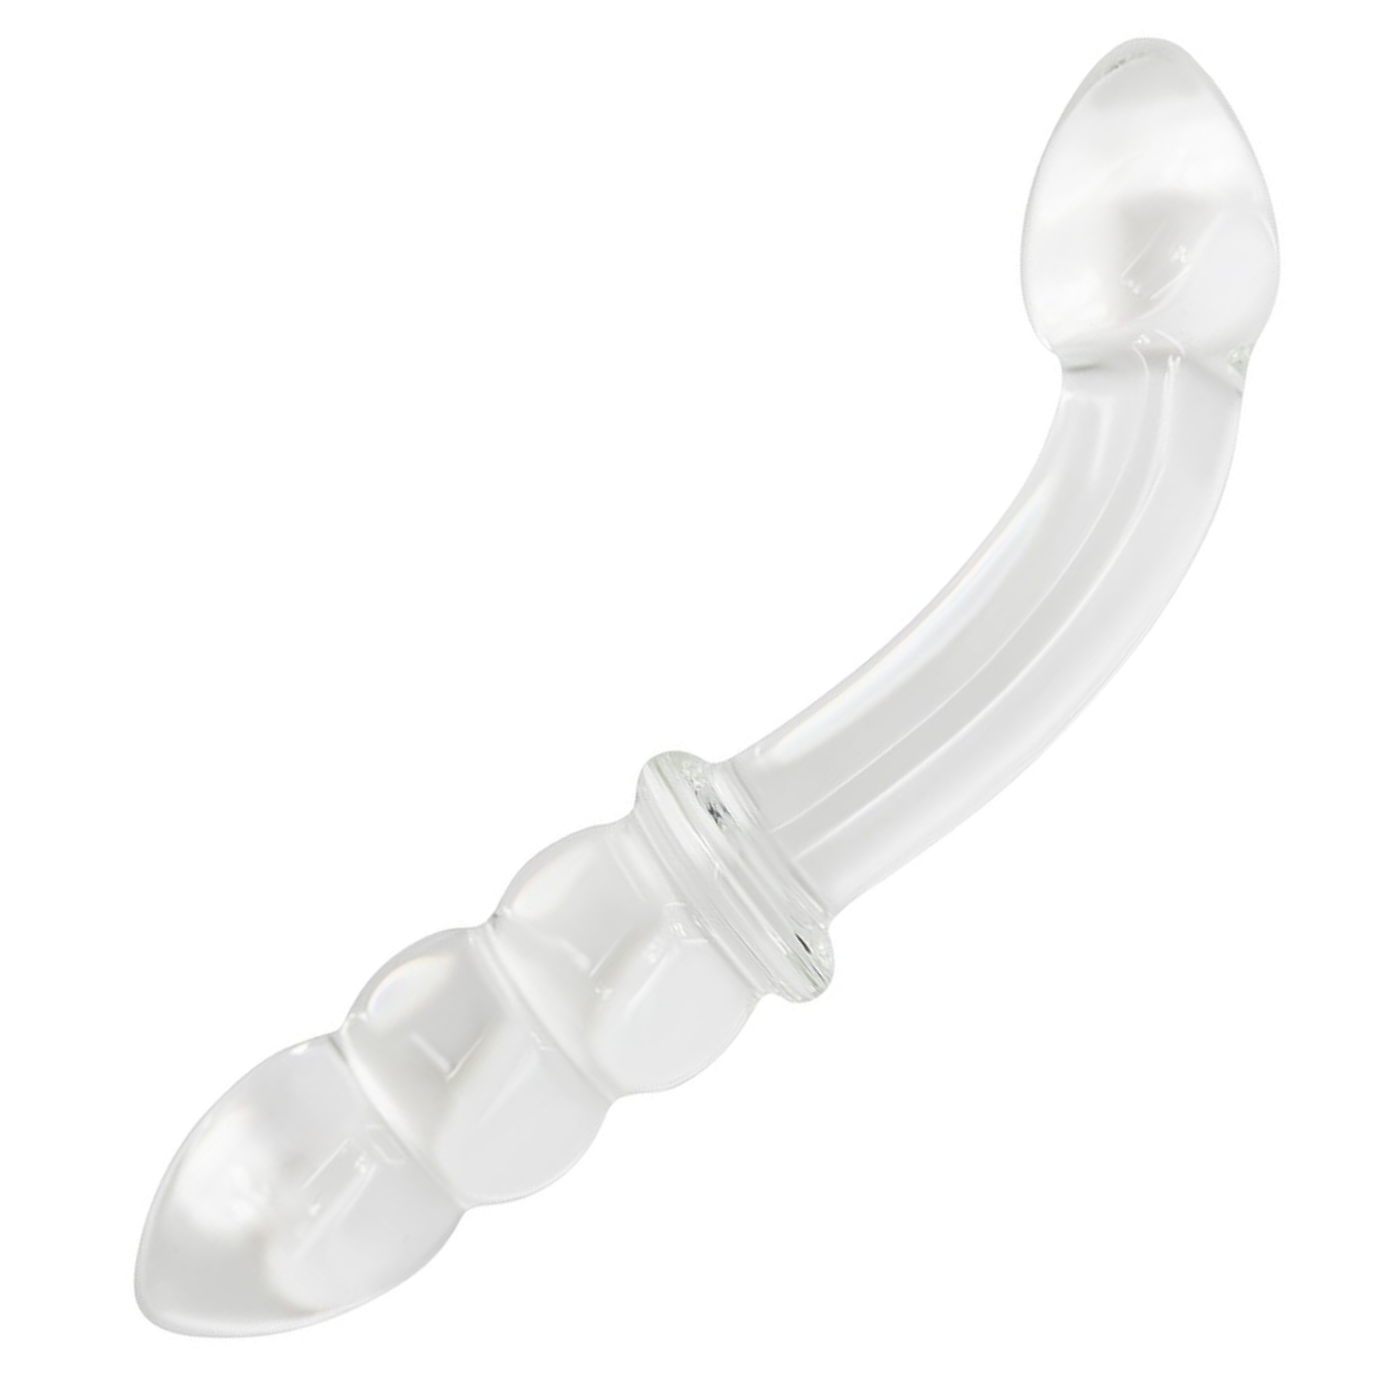 Dual-Ended Curved Glass G-Spot Dildo-BestGSpot